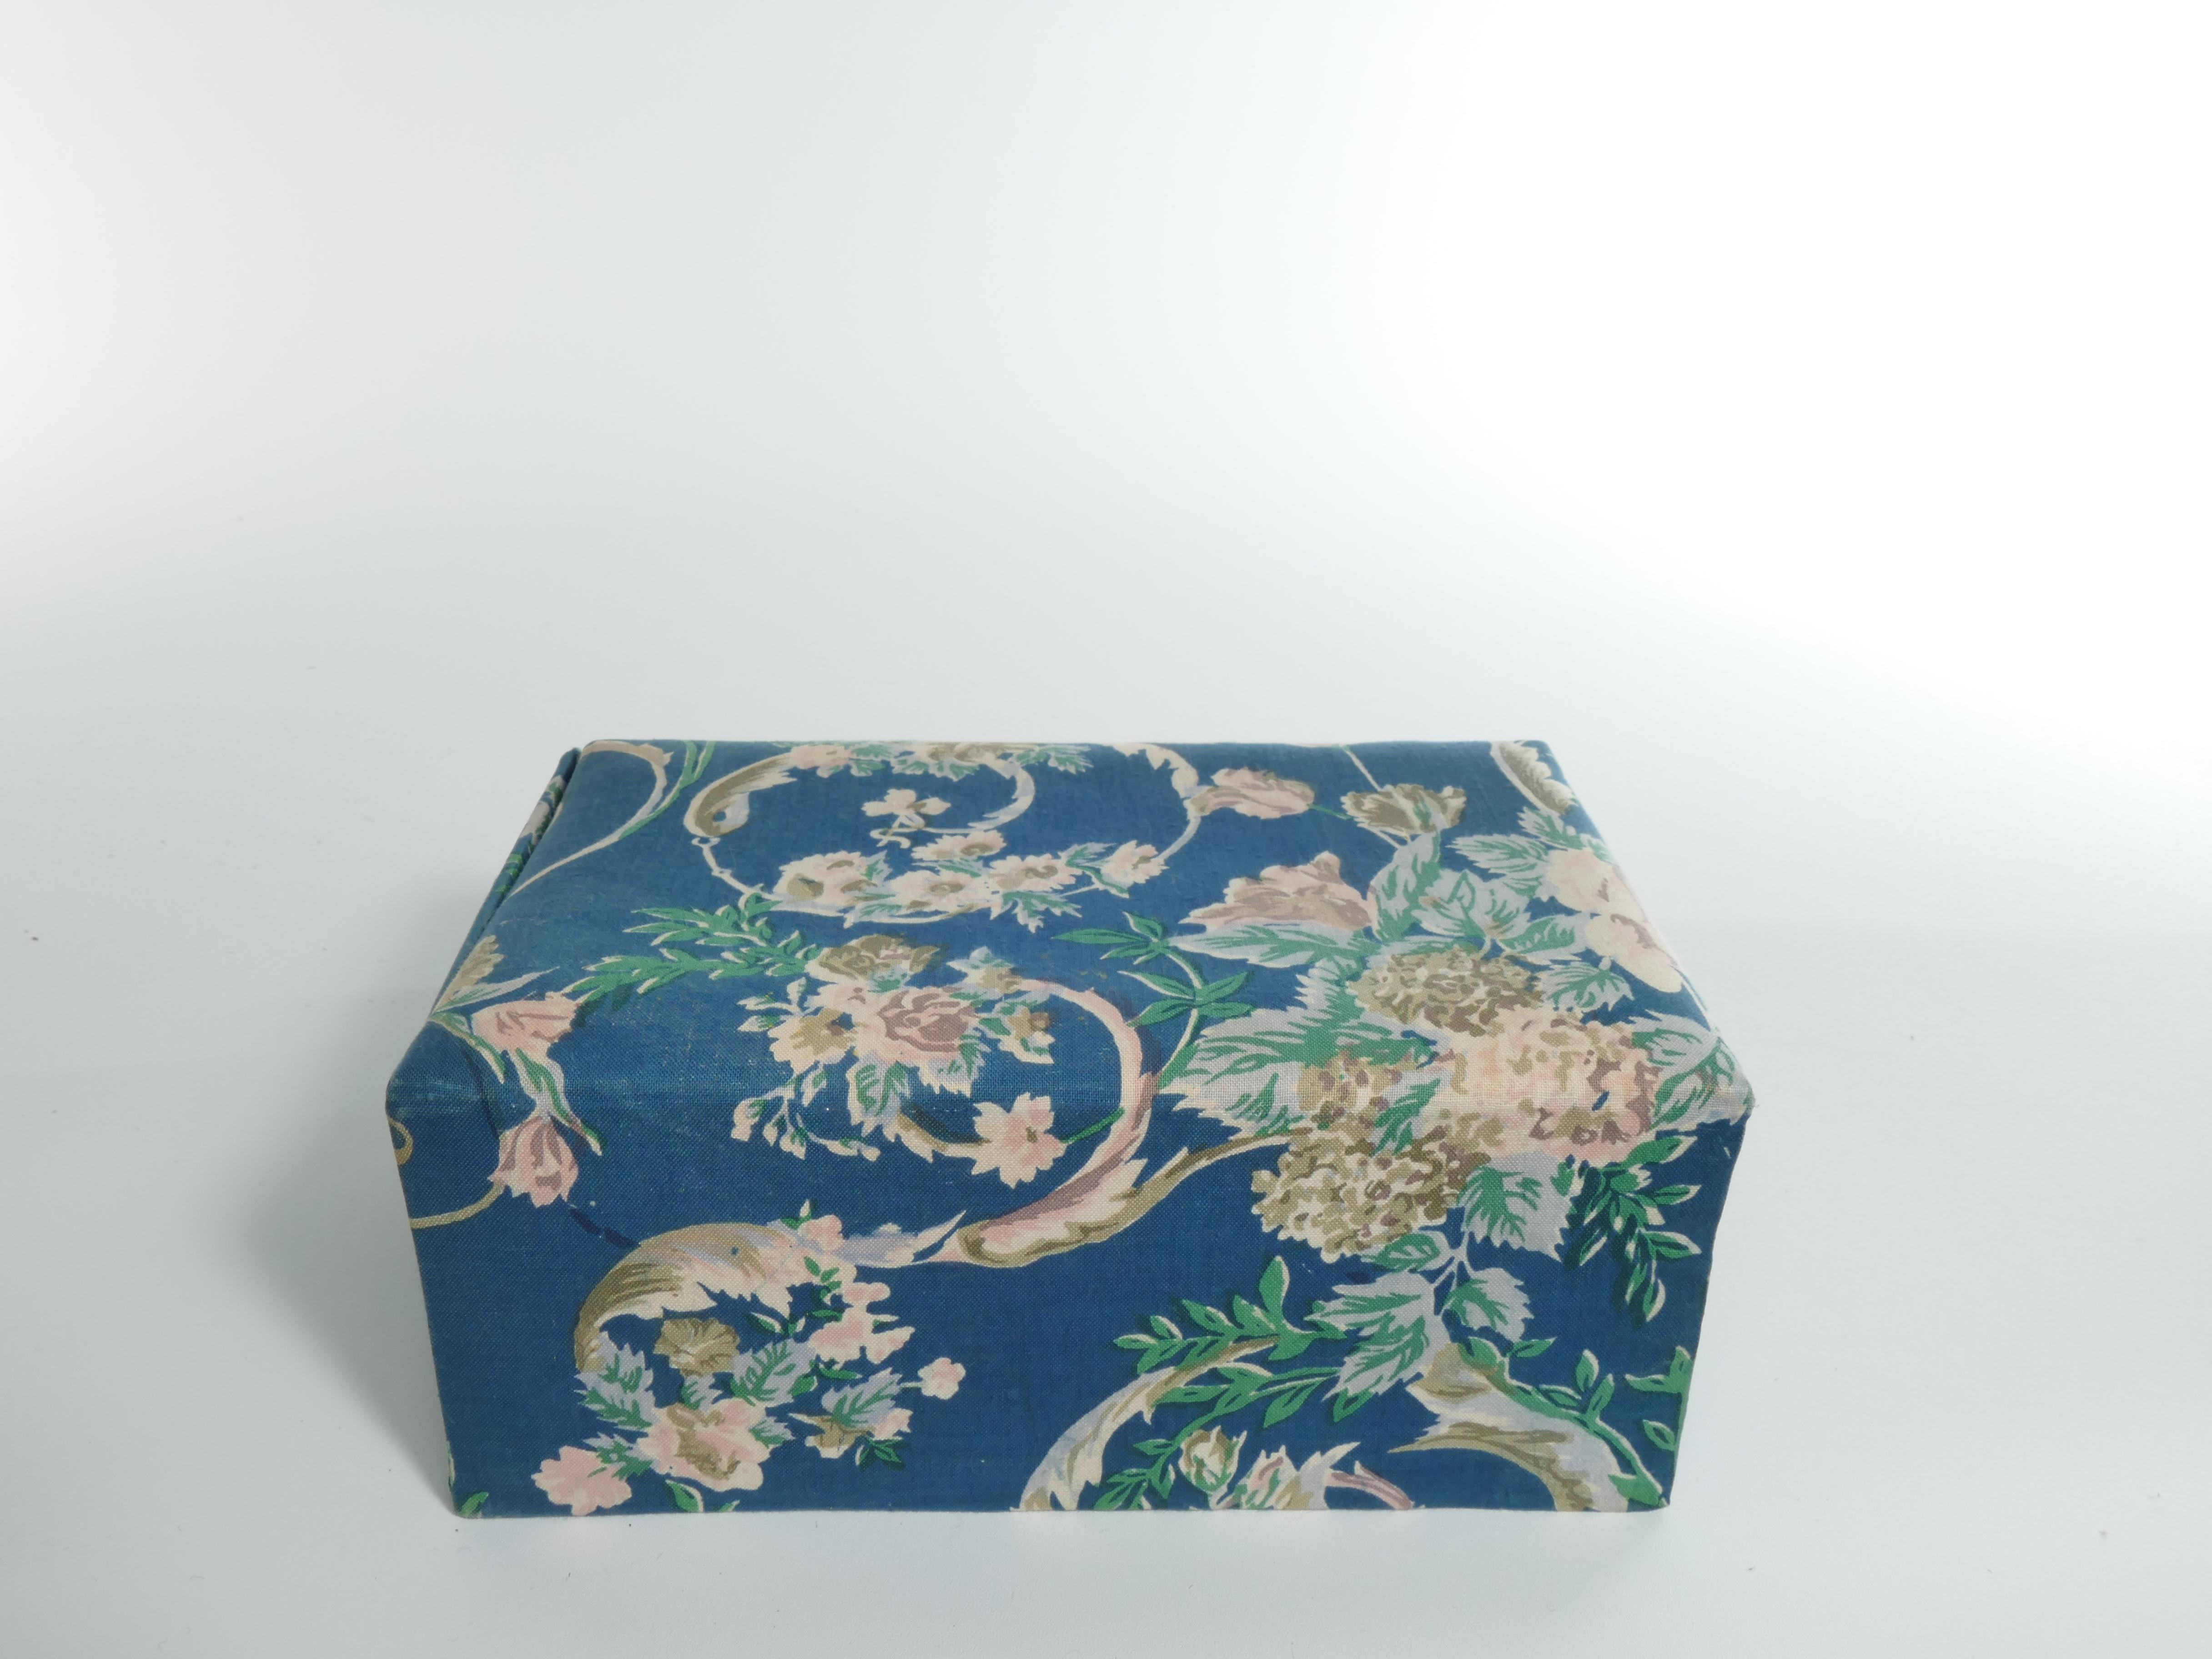 Vintage Jewelry Box in Blue Textile With Floral Motifs For Sale 9